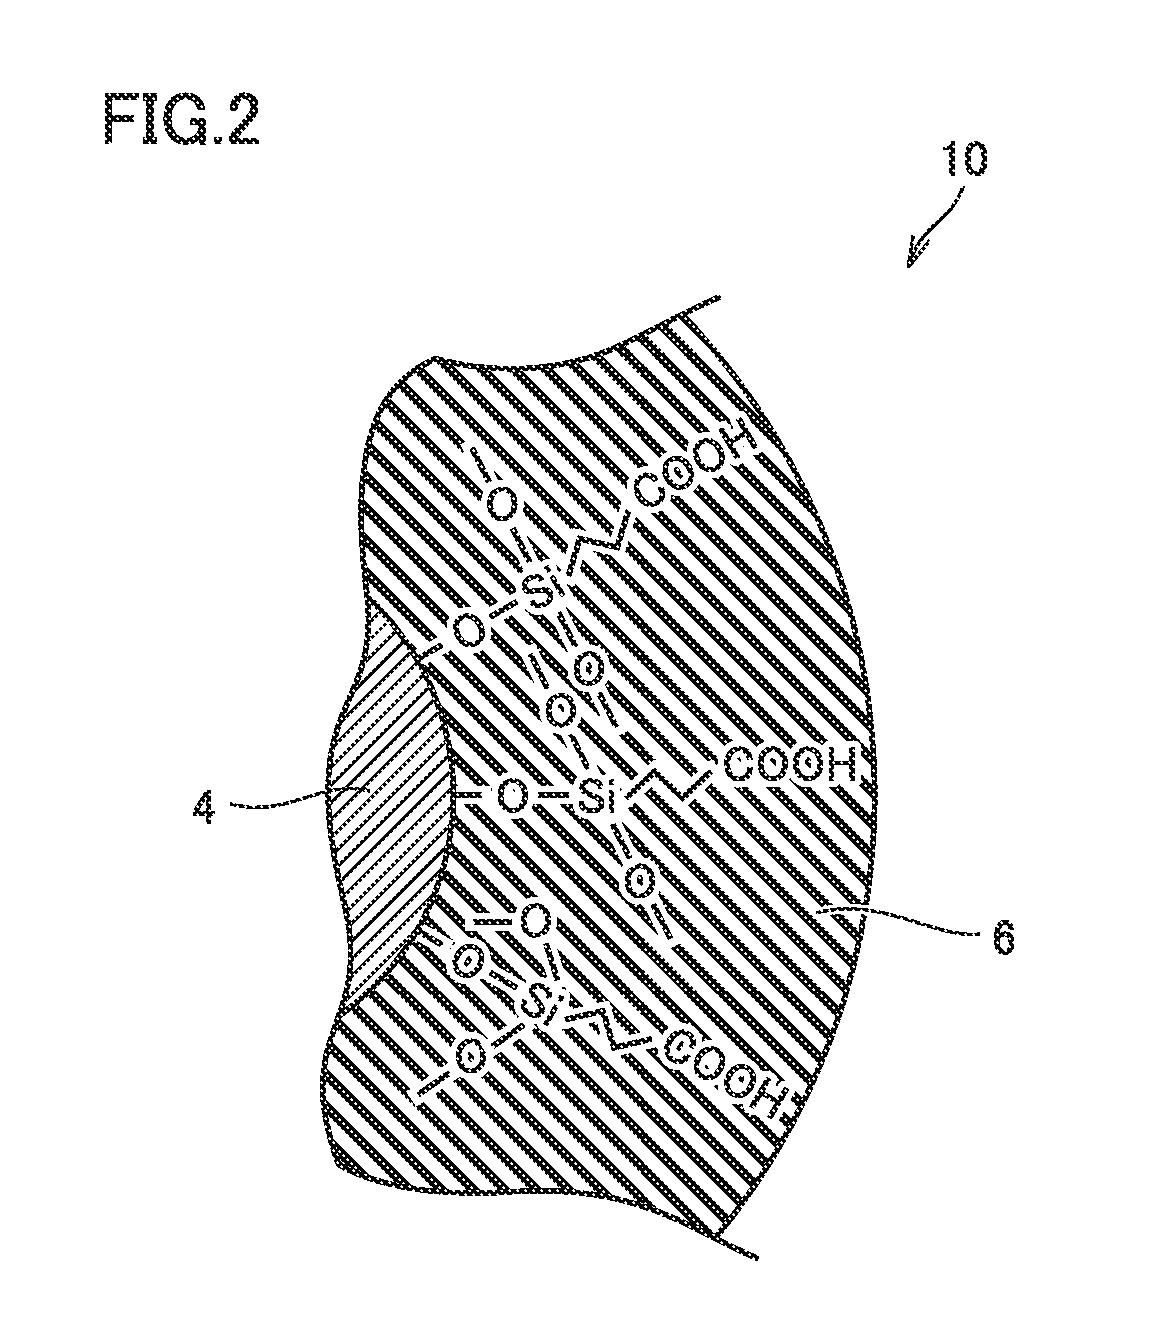 Semiconductor phosphor nanoparticle, semiconductor phosphor nanoparticle-containing glass, light emitting device, and light emitting element